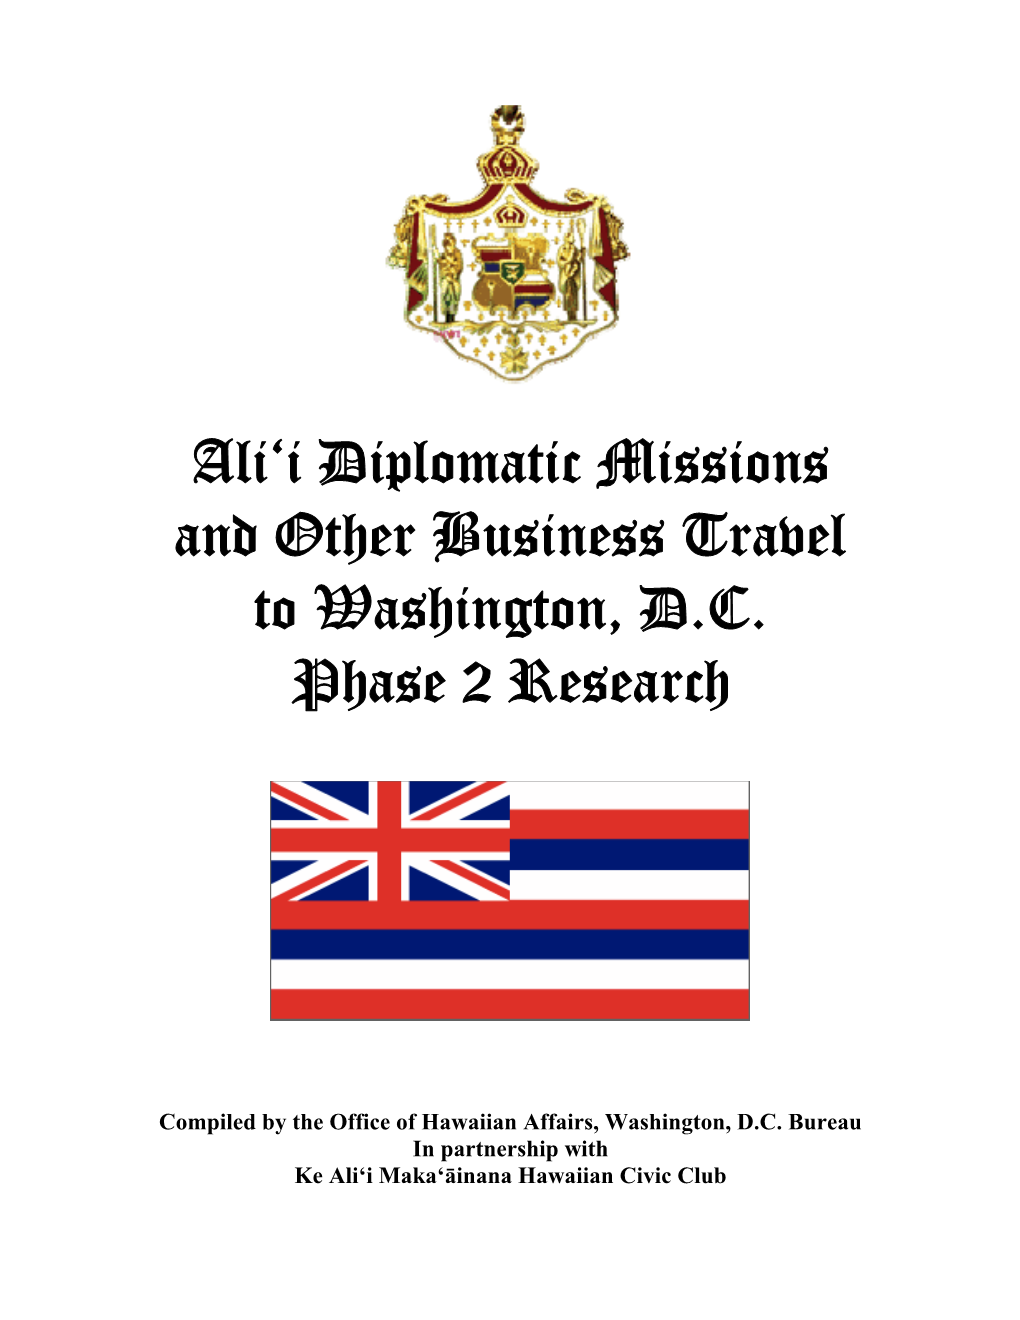 Ali'i Diplomatic Missions and Other Business Travel to Washington, D.C. Phase 2 Research